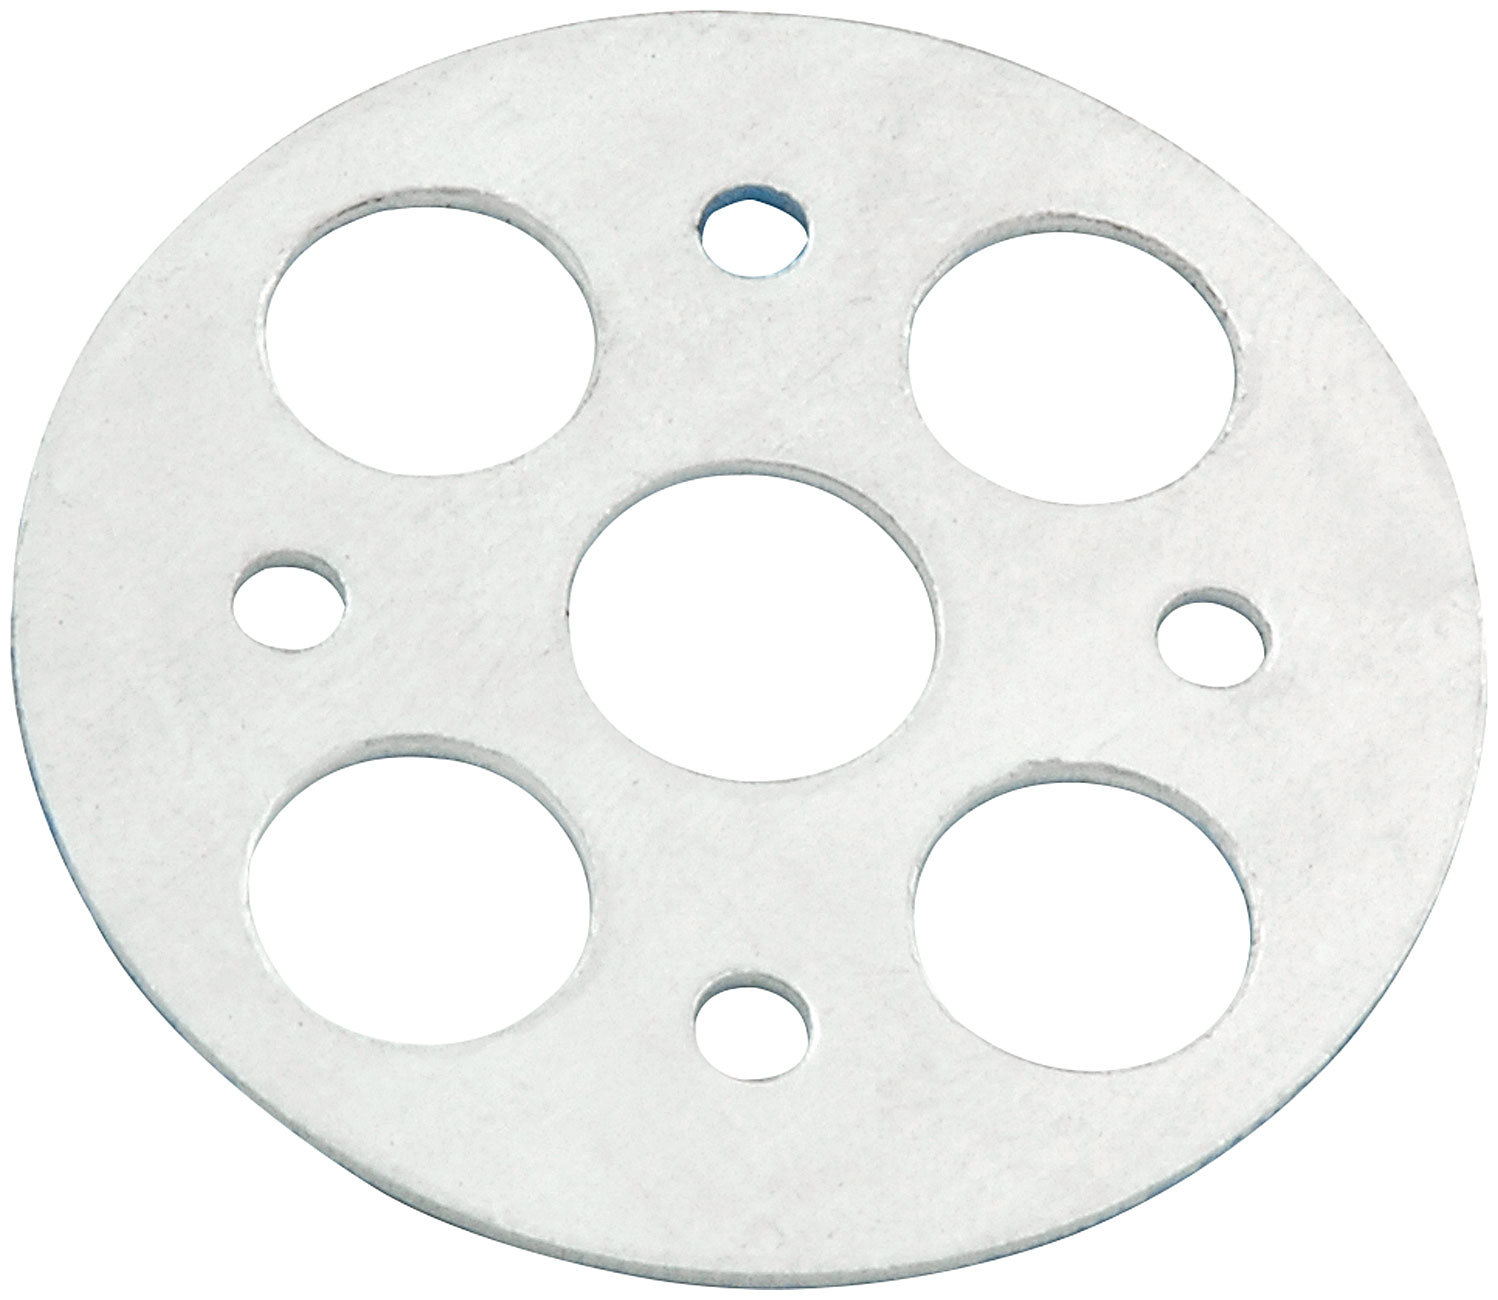 Allstar Performance 18470-25 Scuff Plate, Lightweight, 1-5/8 in OD, 3/8 in ID, Aluminum, Clear Anodized, Set of 25